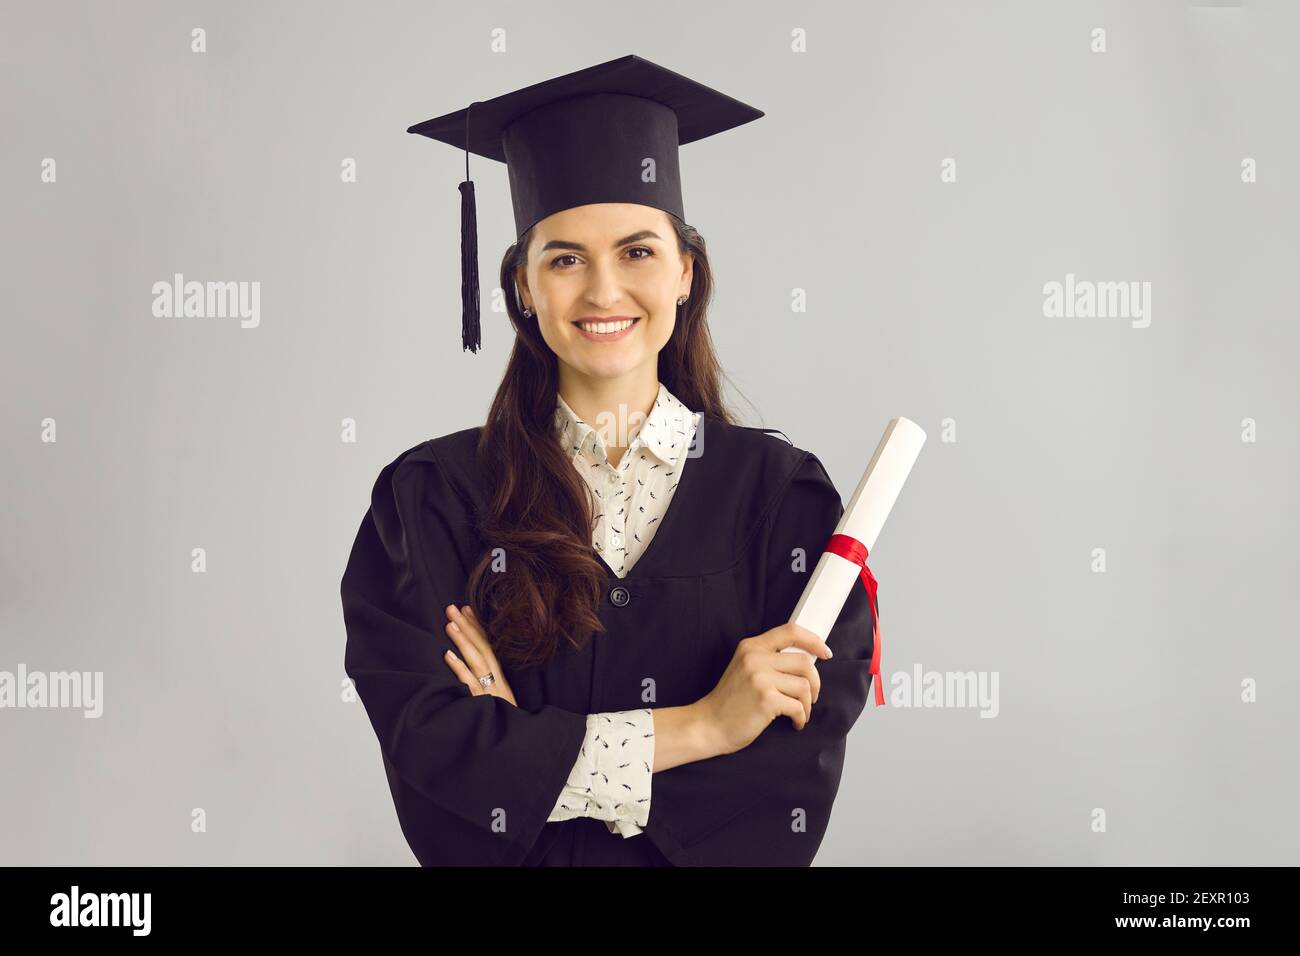 Studio portrait of happy smart college graduate holding her diploma and smiling at camera Stock Photo